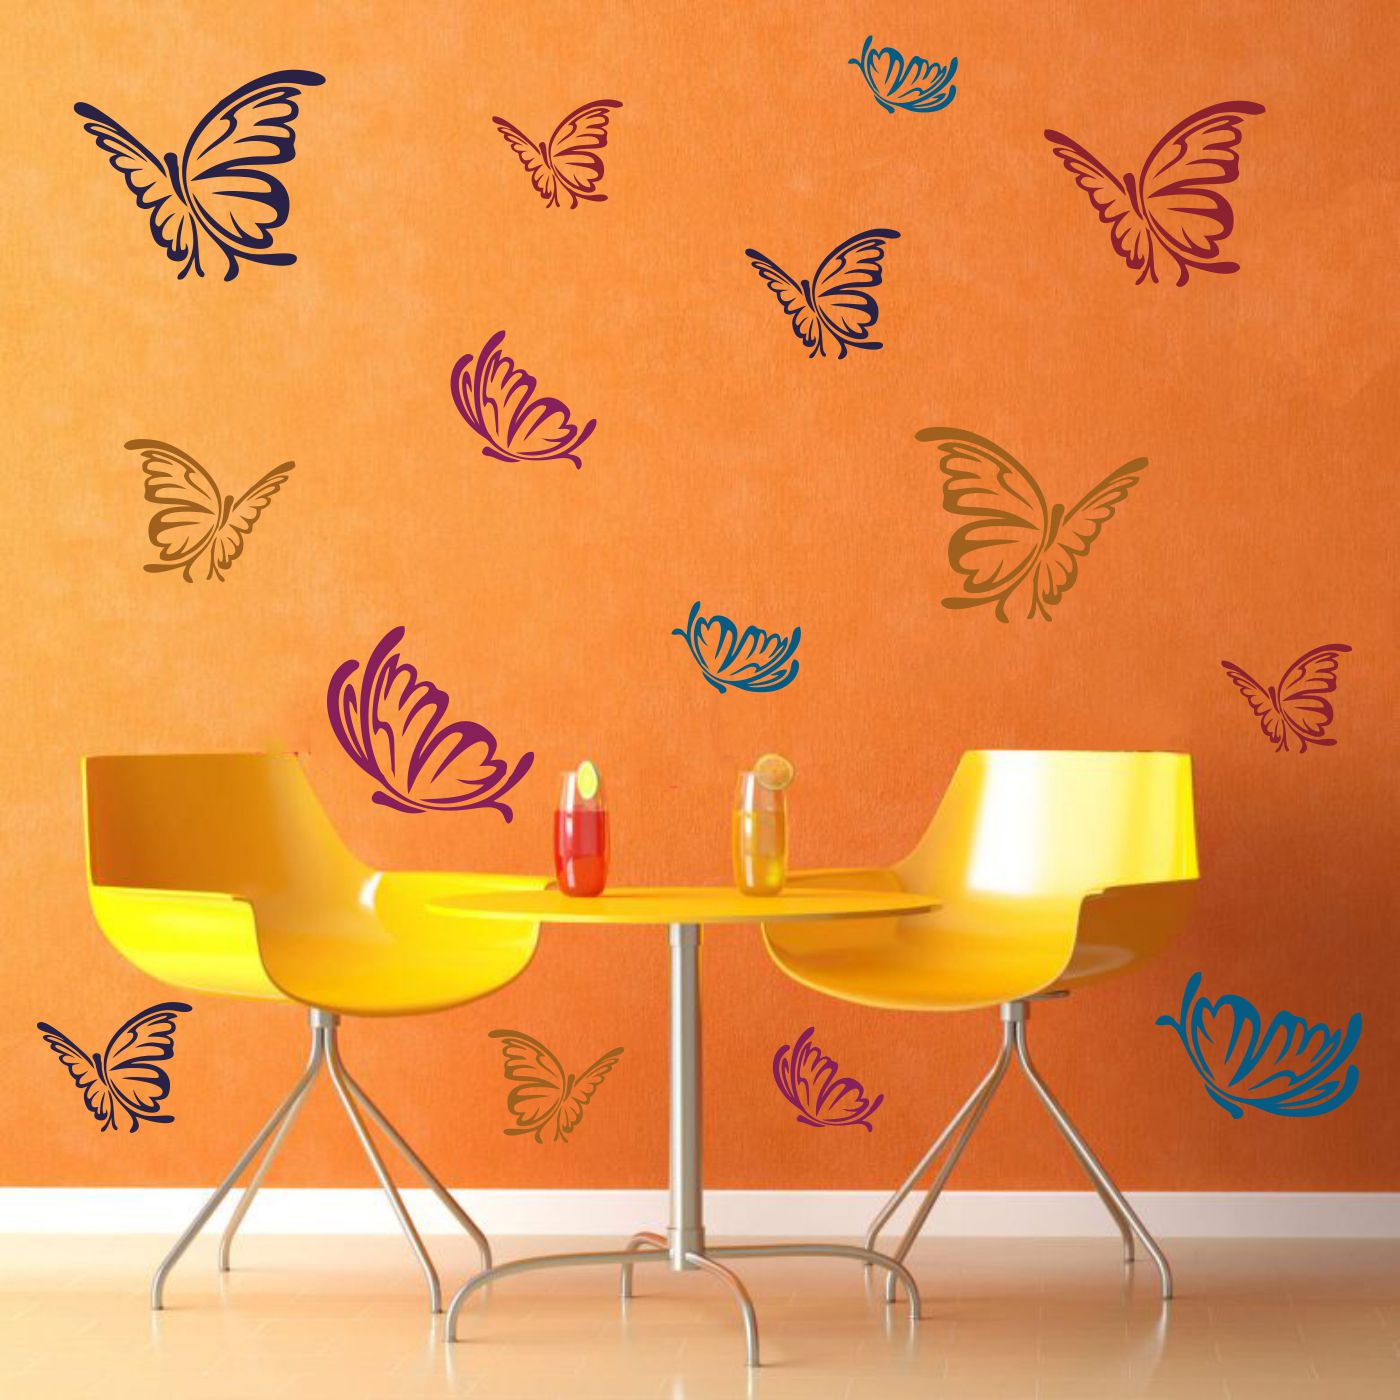 ORKA Nature Wall Decal Sticker 39   